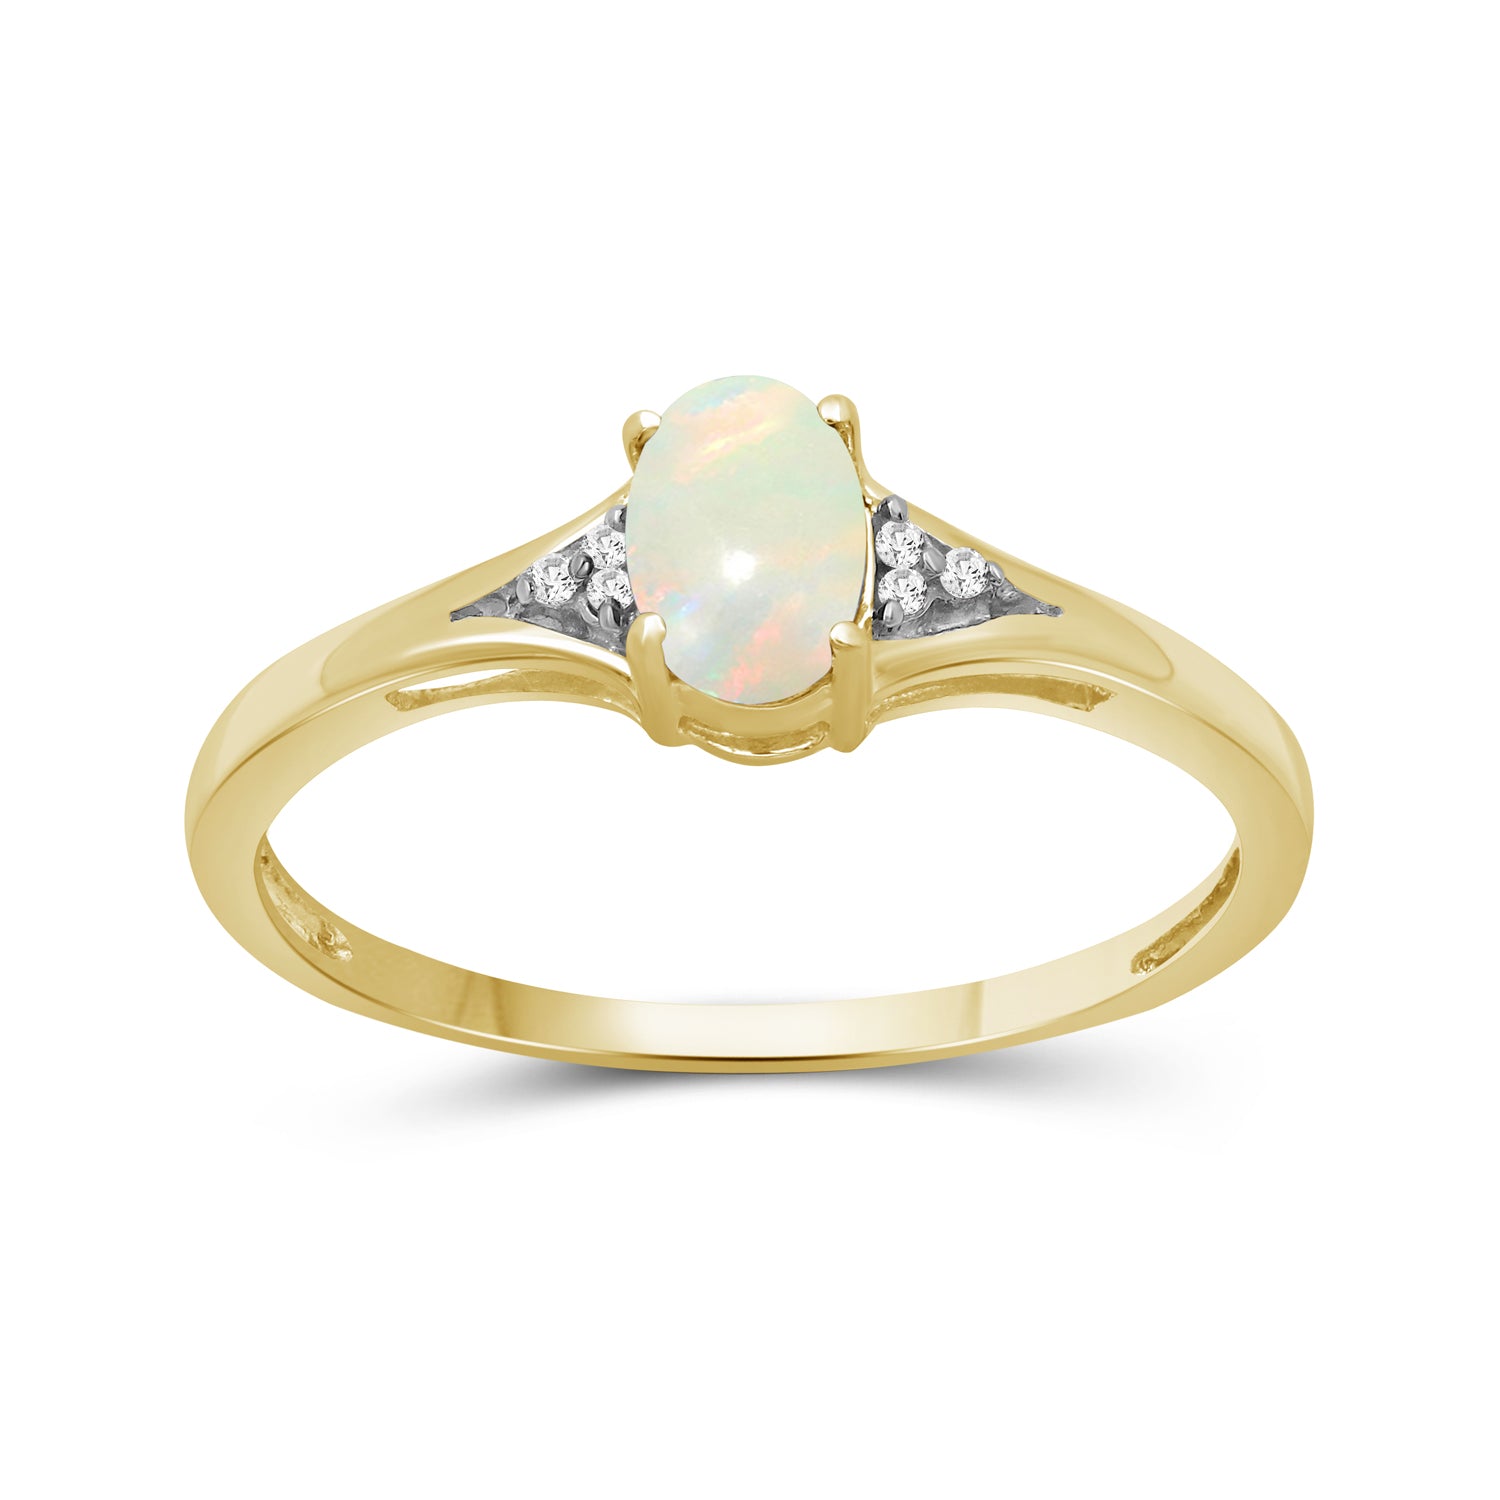 Opal Ring October Birthstone Jewelry – 0.25 Carat Opal 14K Gold Over Silver Ring Jewelry with White Diamond Accent – Gemstone Rings with Hypoallergenic 14K Gold Over Silver Band